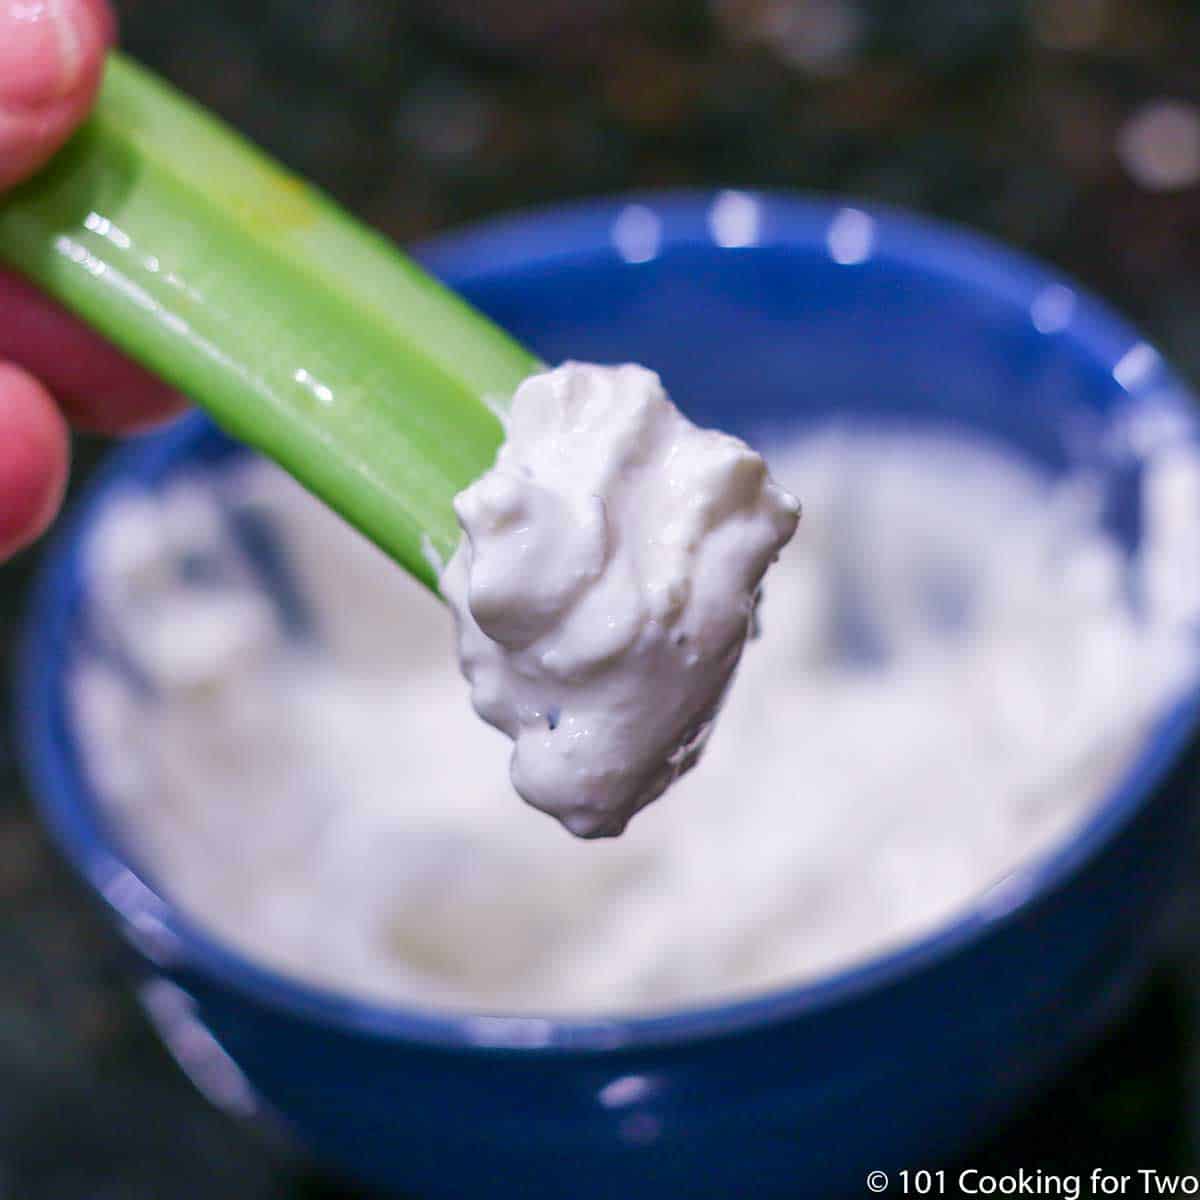 blue cheese dressing on a celery stick.